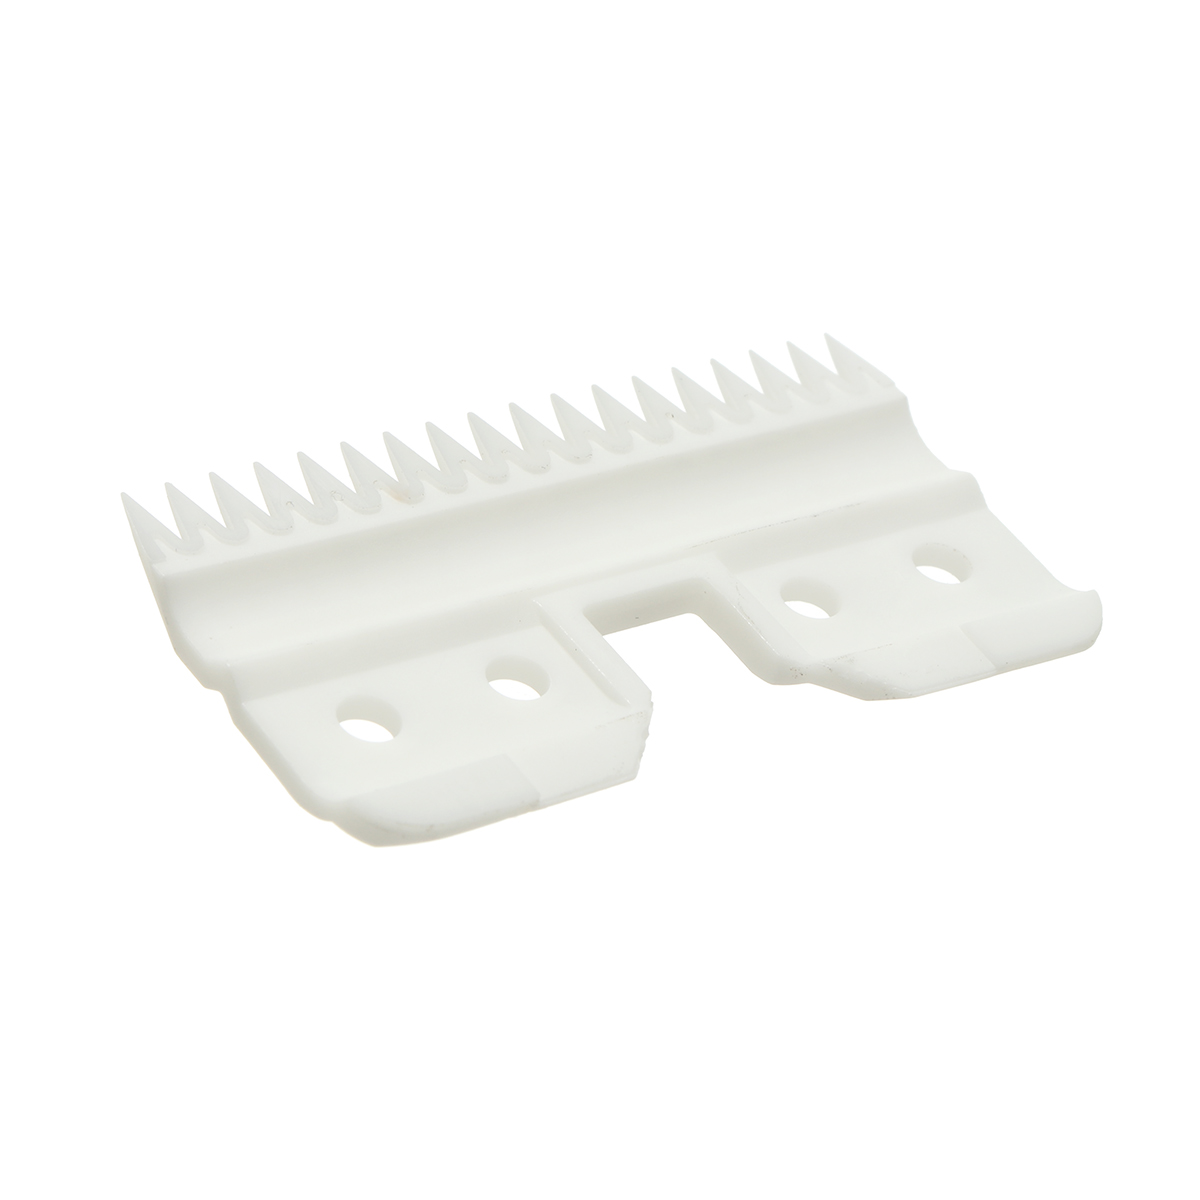 1x18-Teeth-Ceramic-Blade-Replacement-Accessories-For-OSTER-A5-Series-Clipper-Blades-Cutter-1561061-3